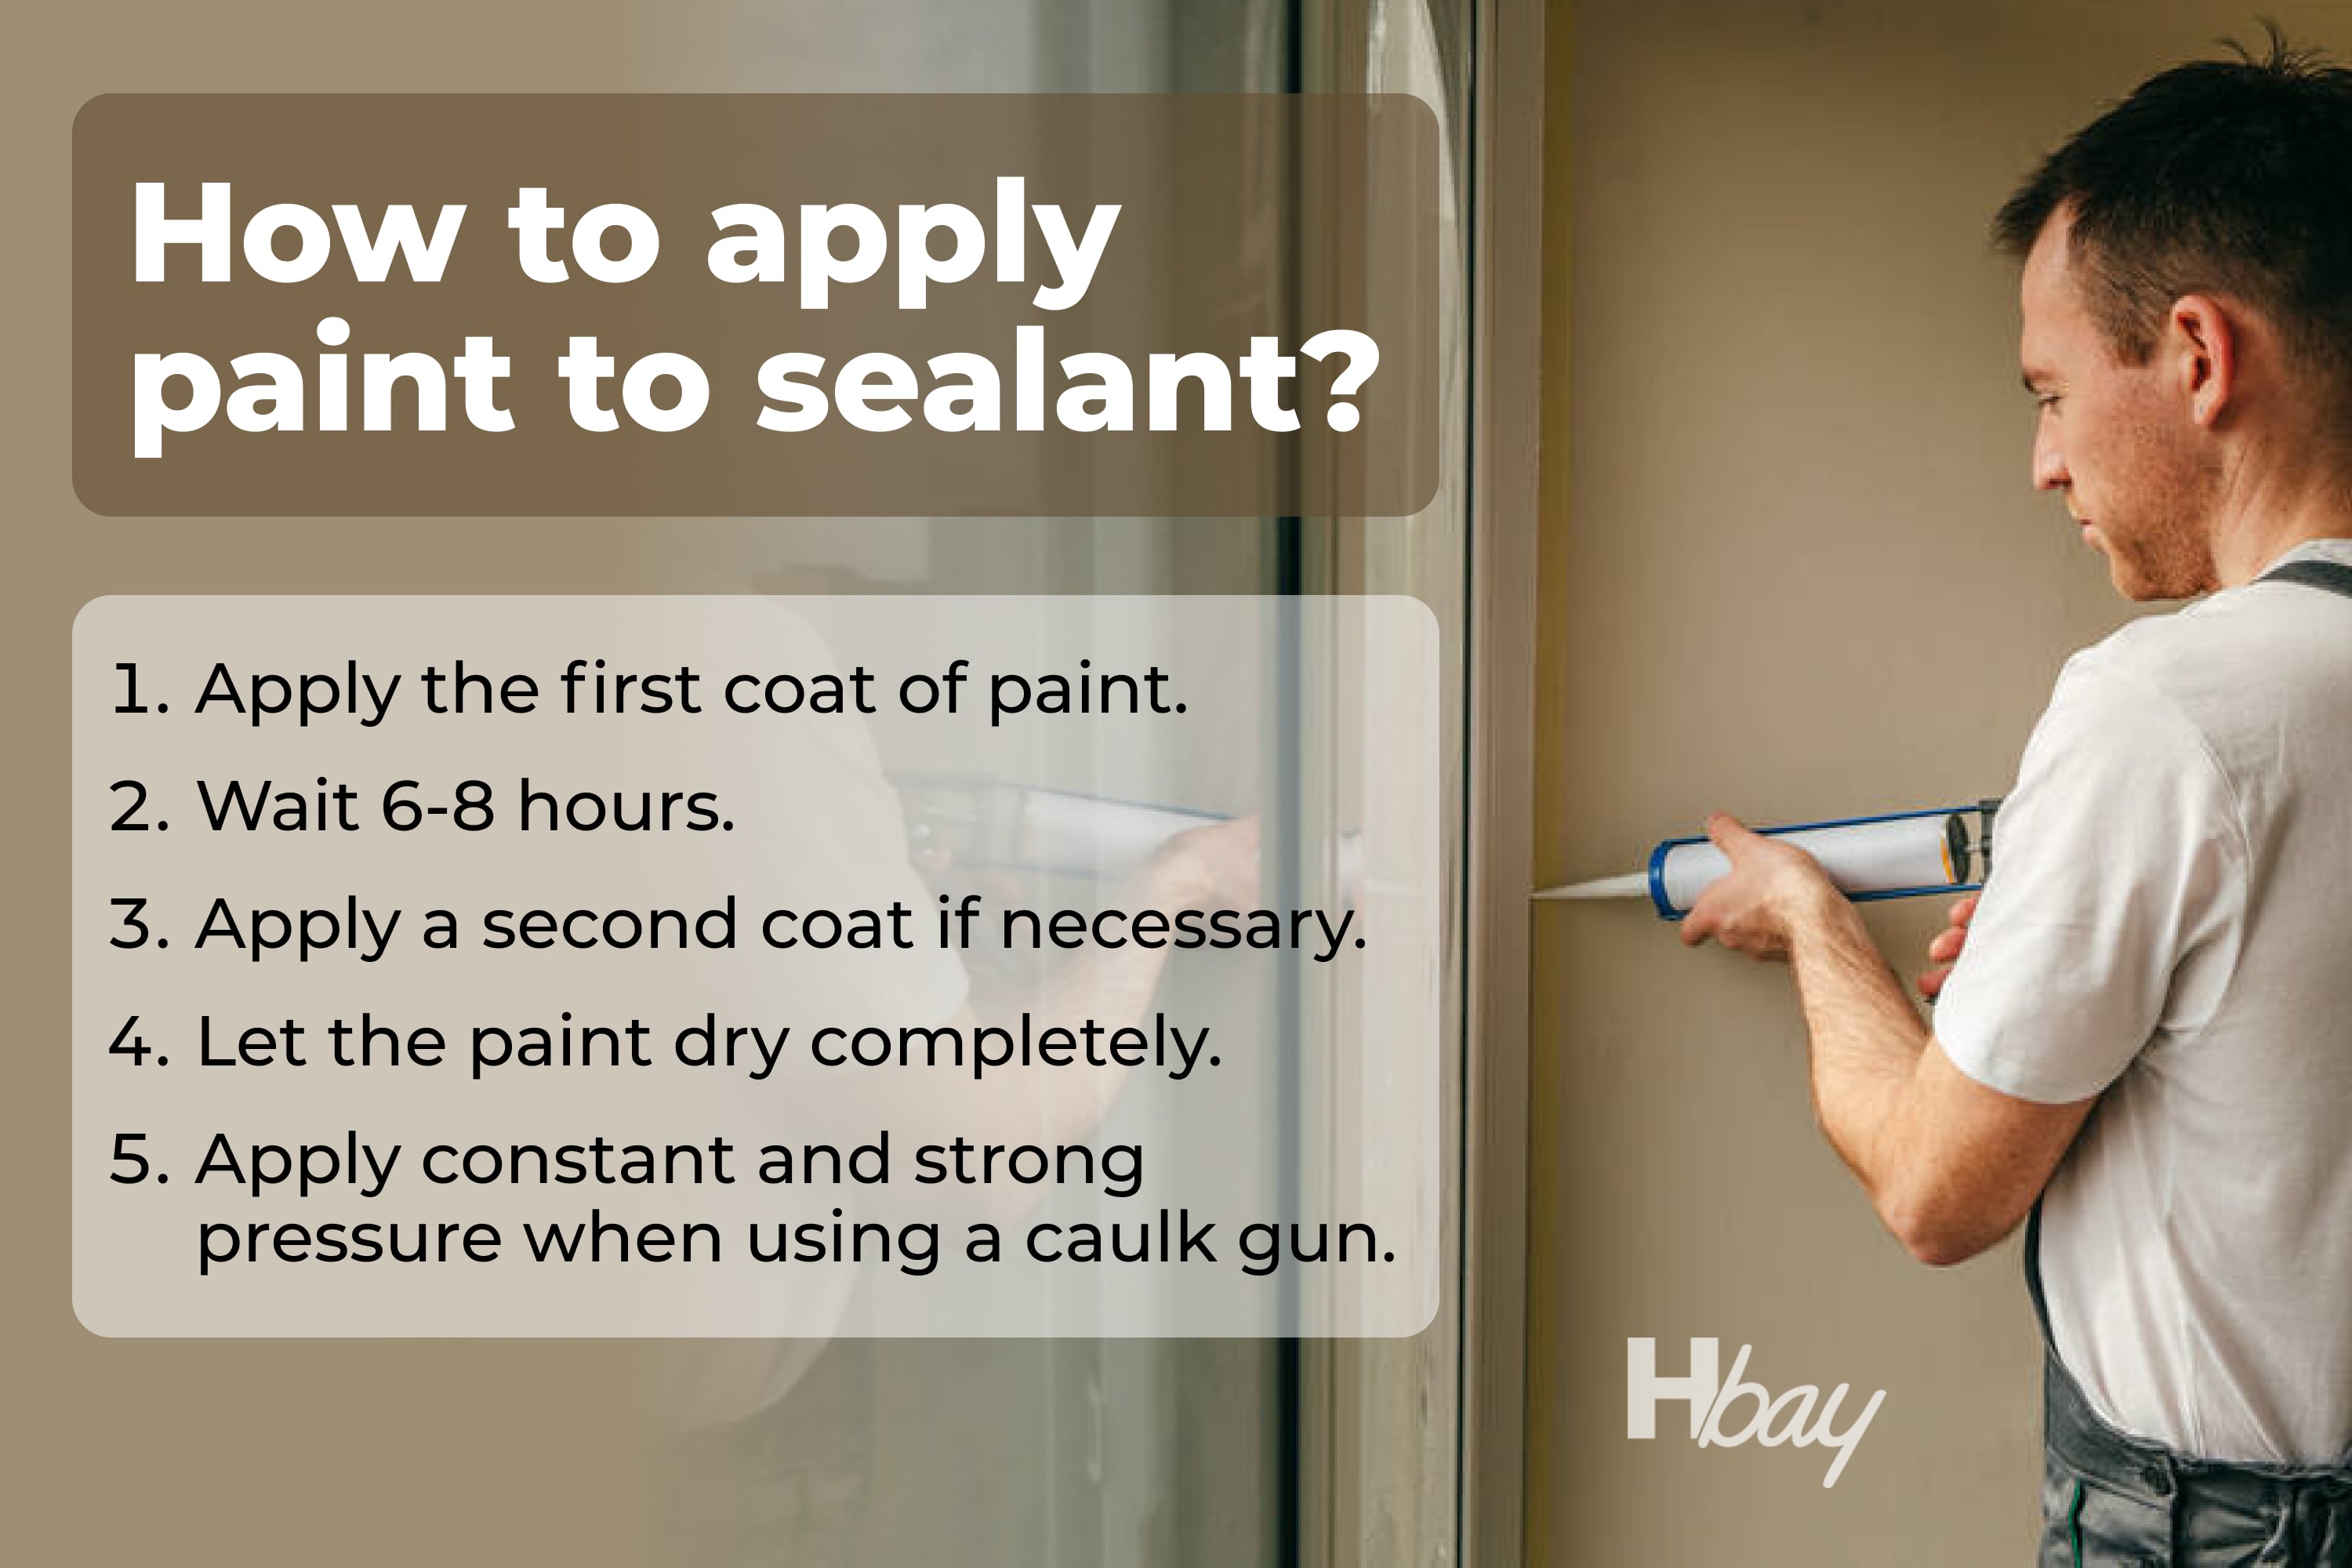 Paint the Caulk.How to apply paint to sealant